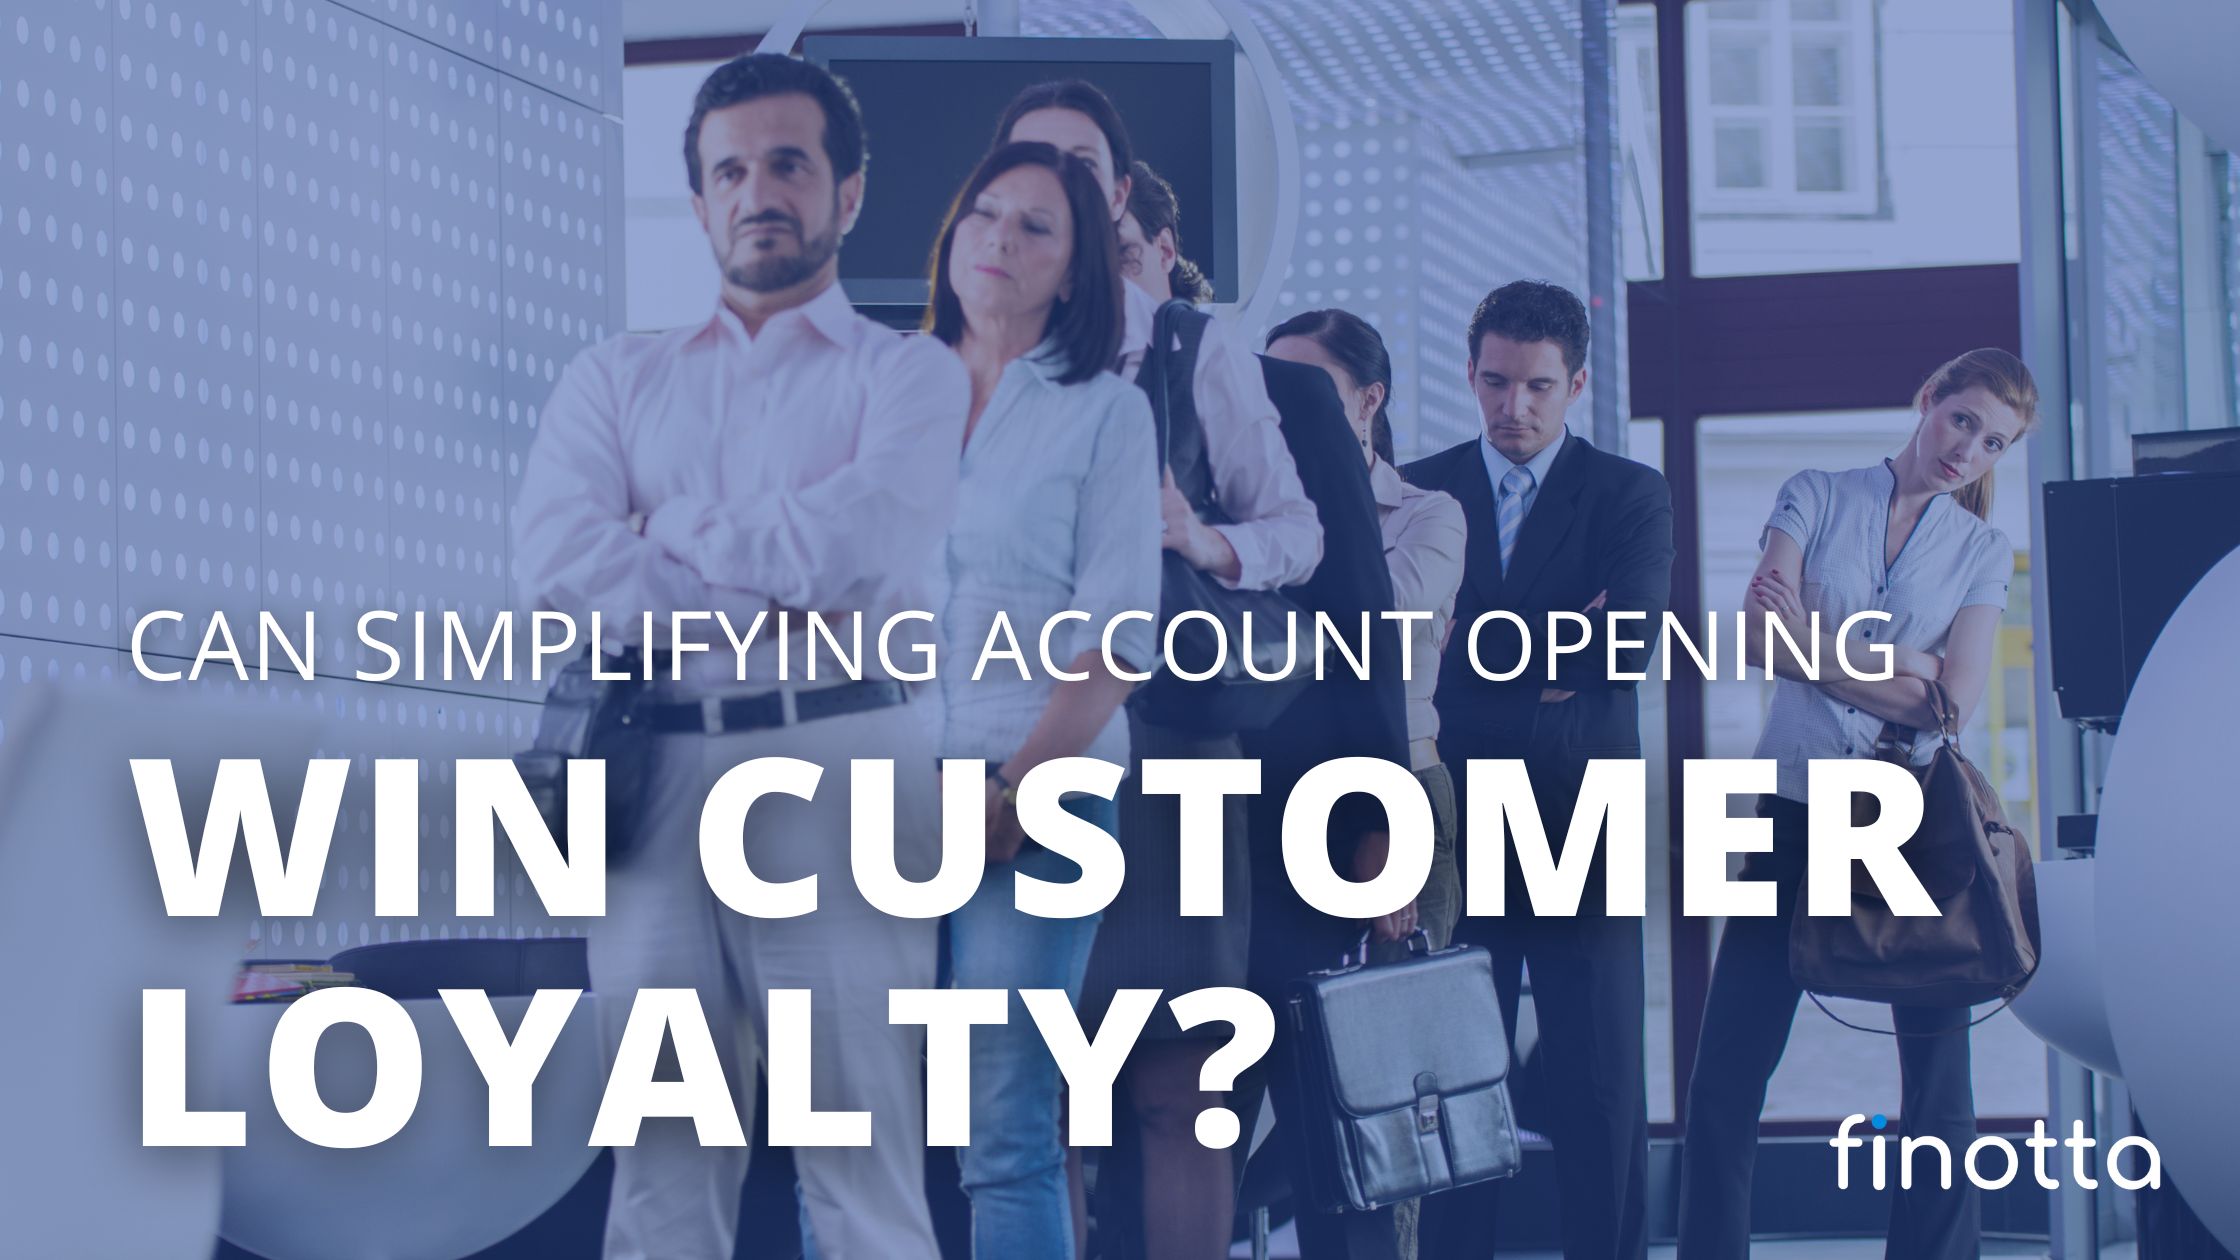 Can Simplifying Account Opening Win Customer Loyalty?